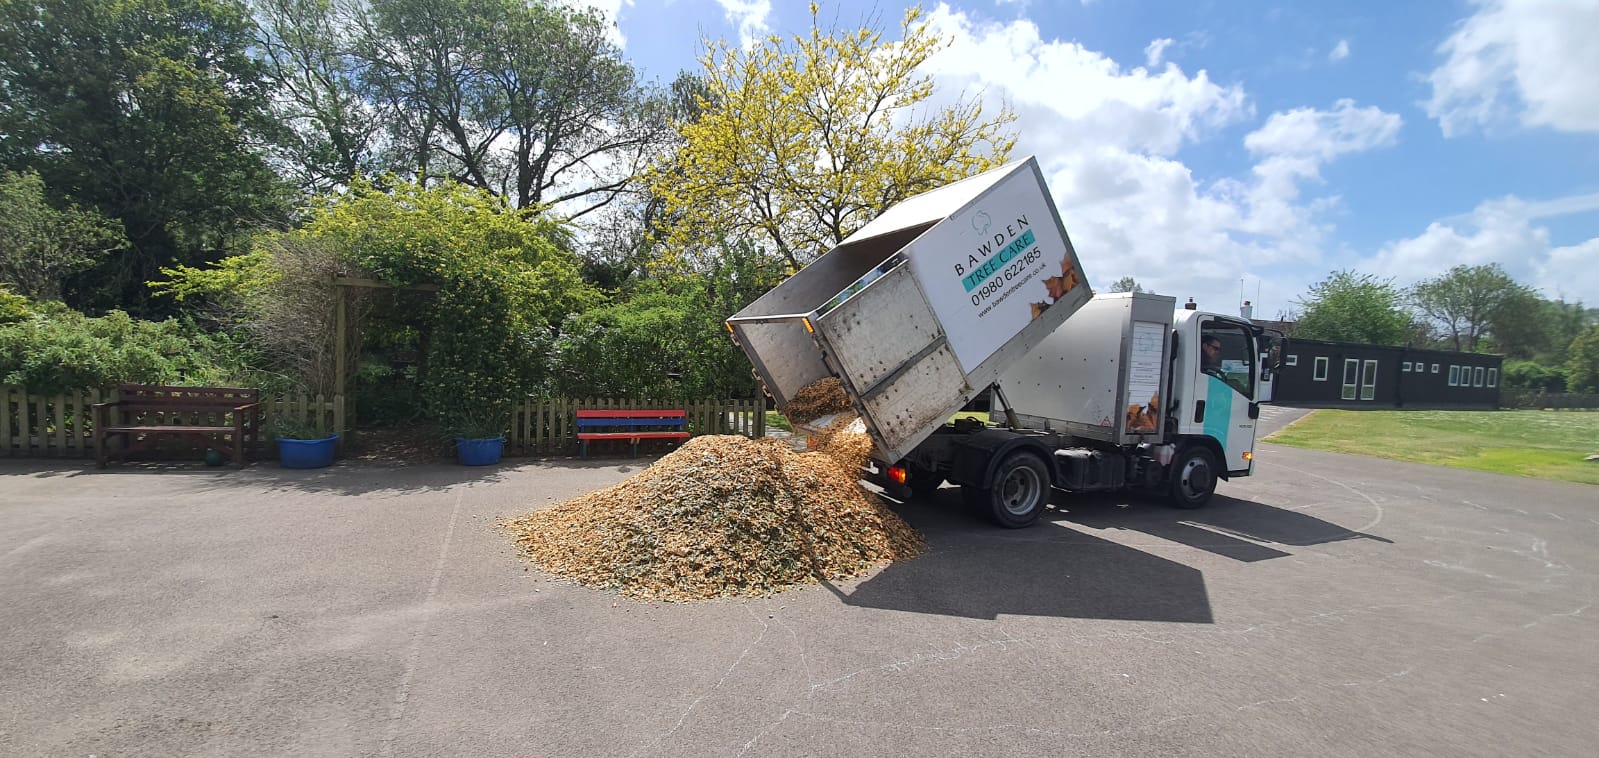 donating woodchip to a local primary school